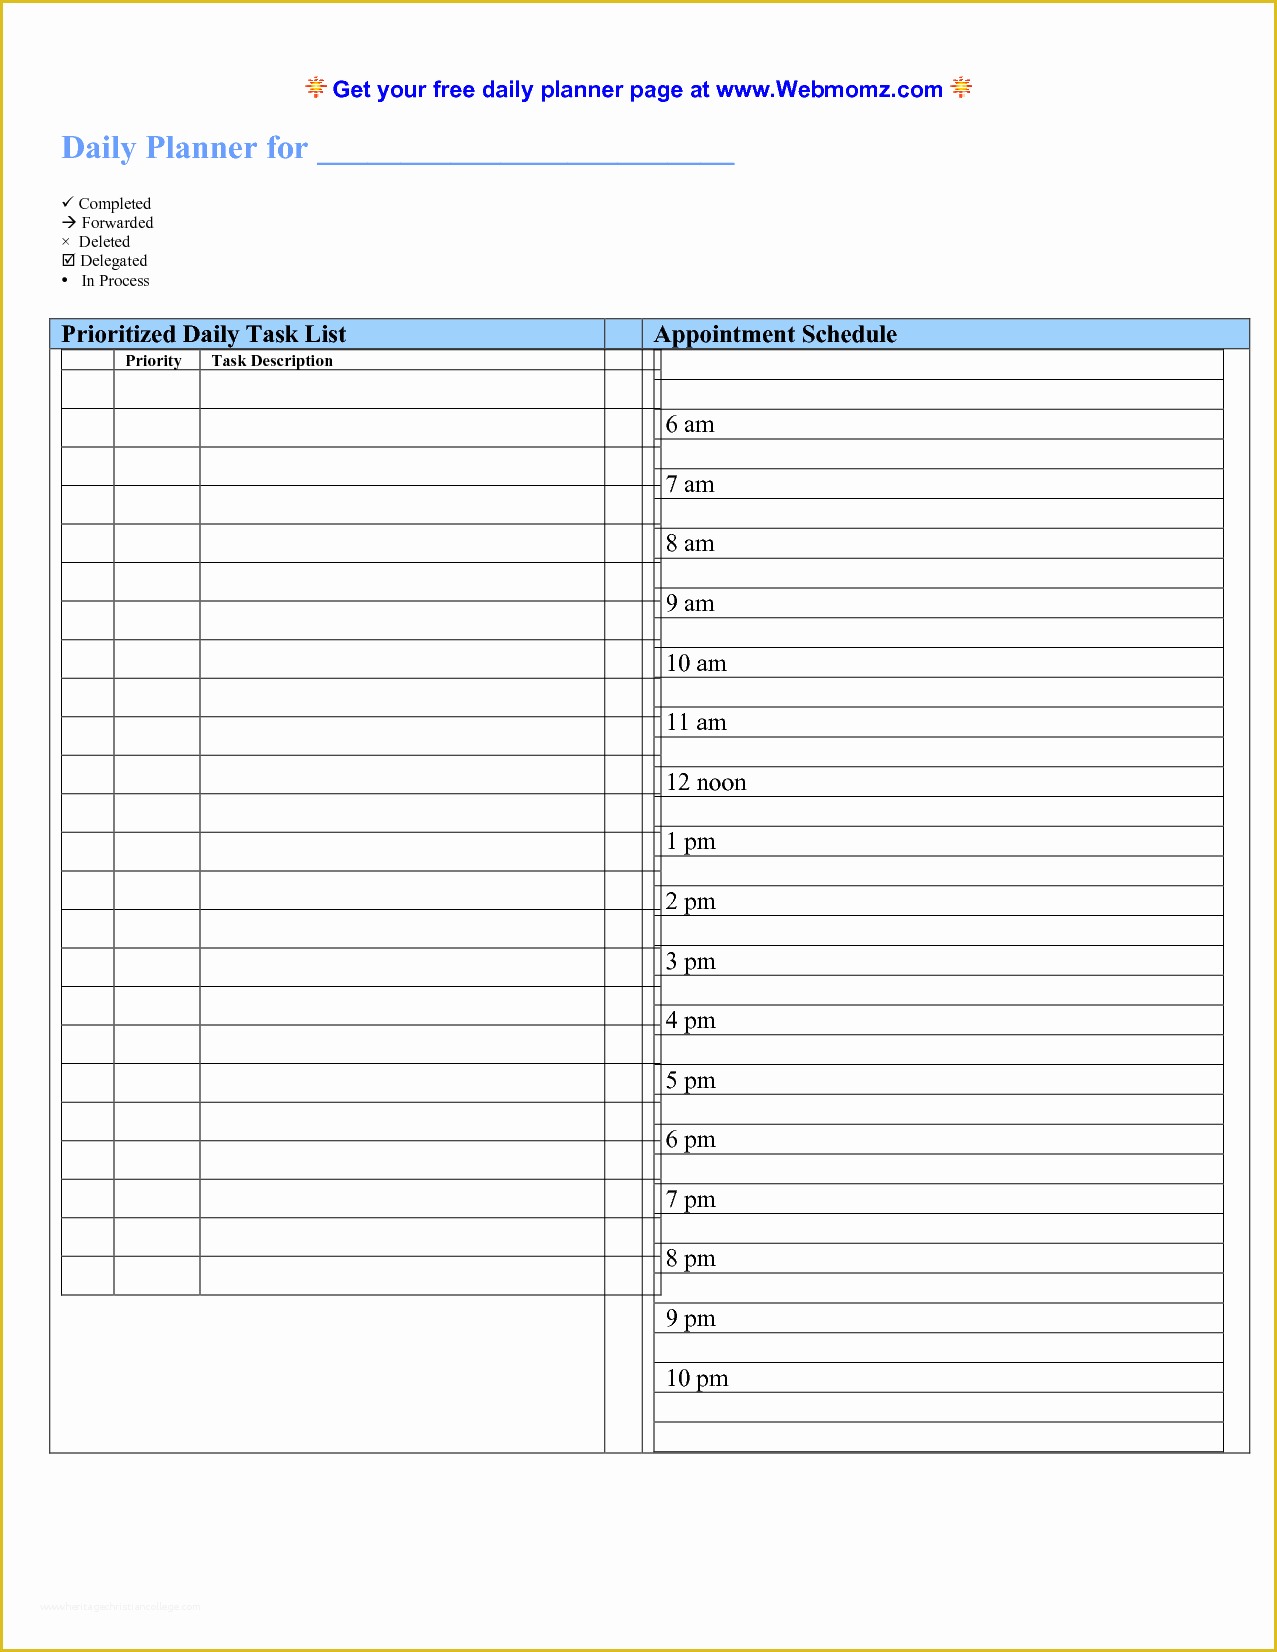 Free Daily Planner Template Of 3 Free Daily Planner